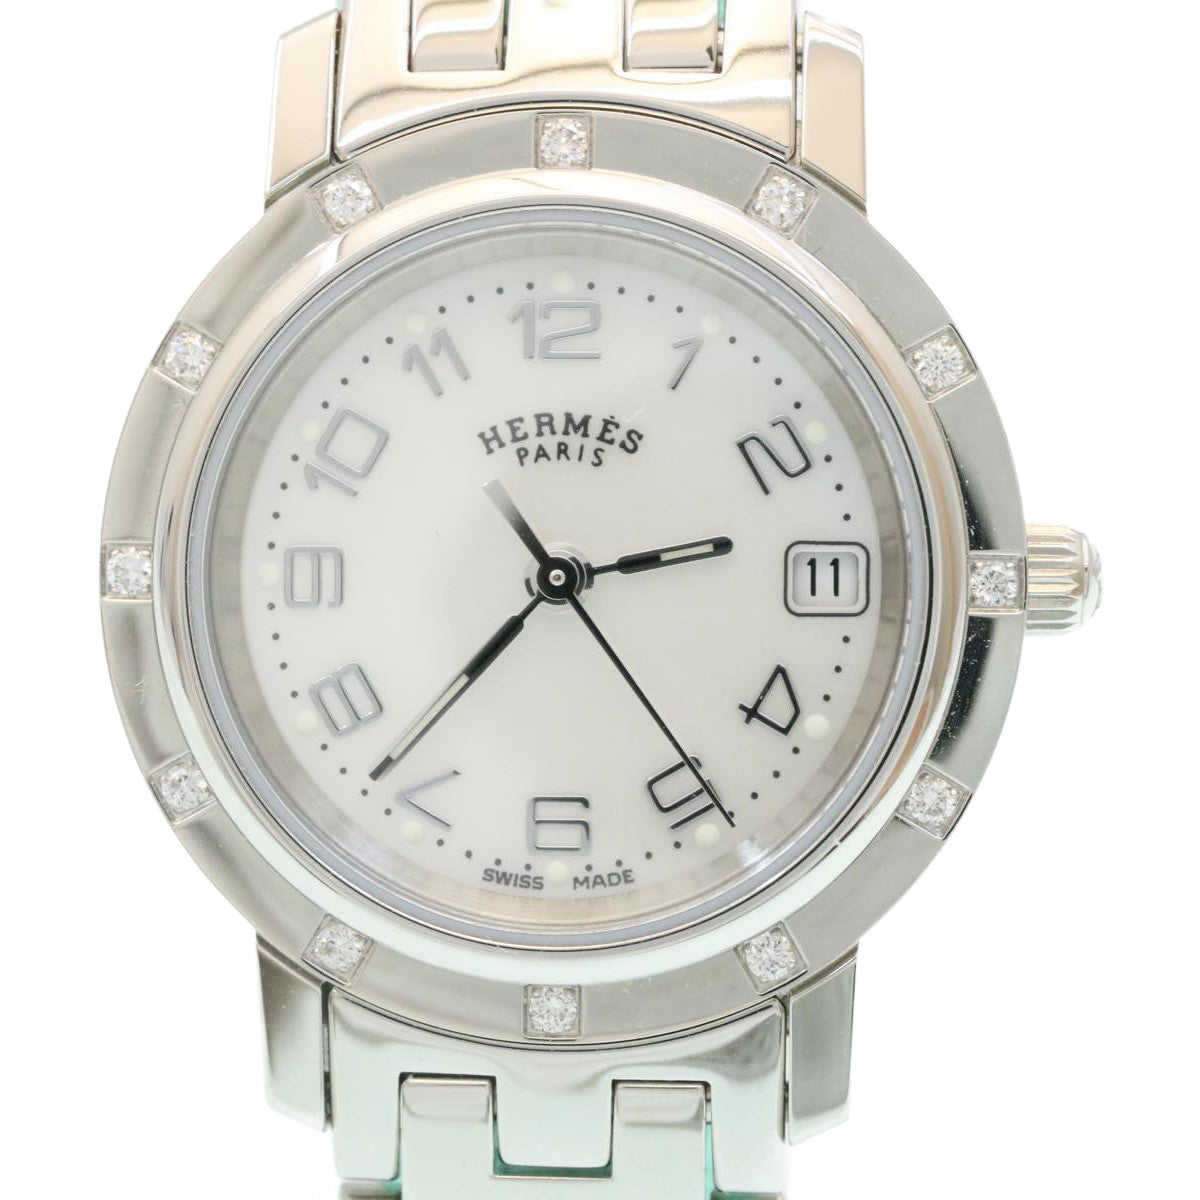 HERMES Watch 12 Diamond Stones Silver Tone Stainless Auth 18908A